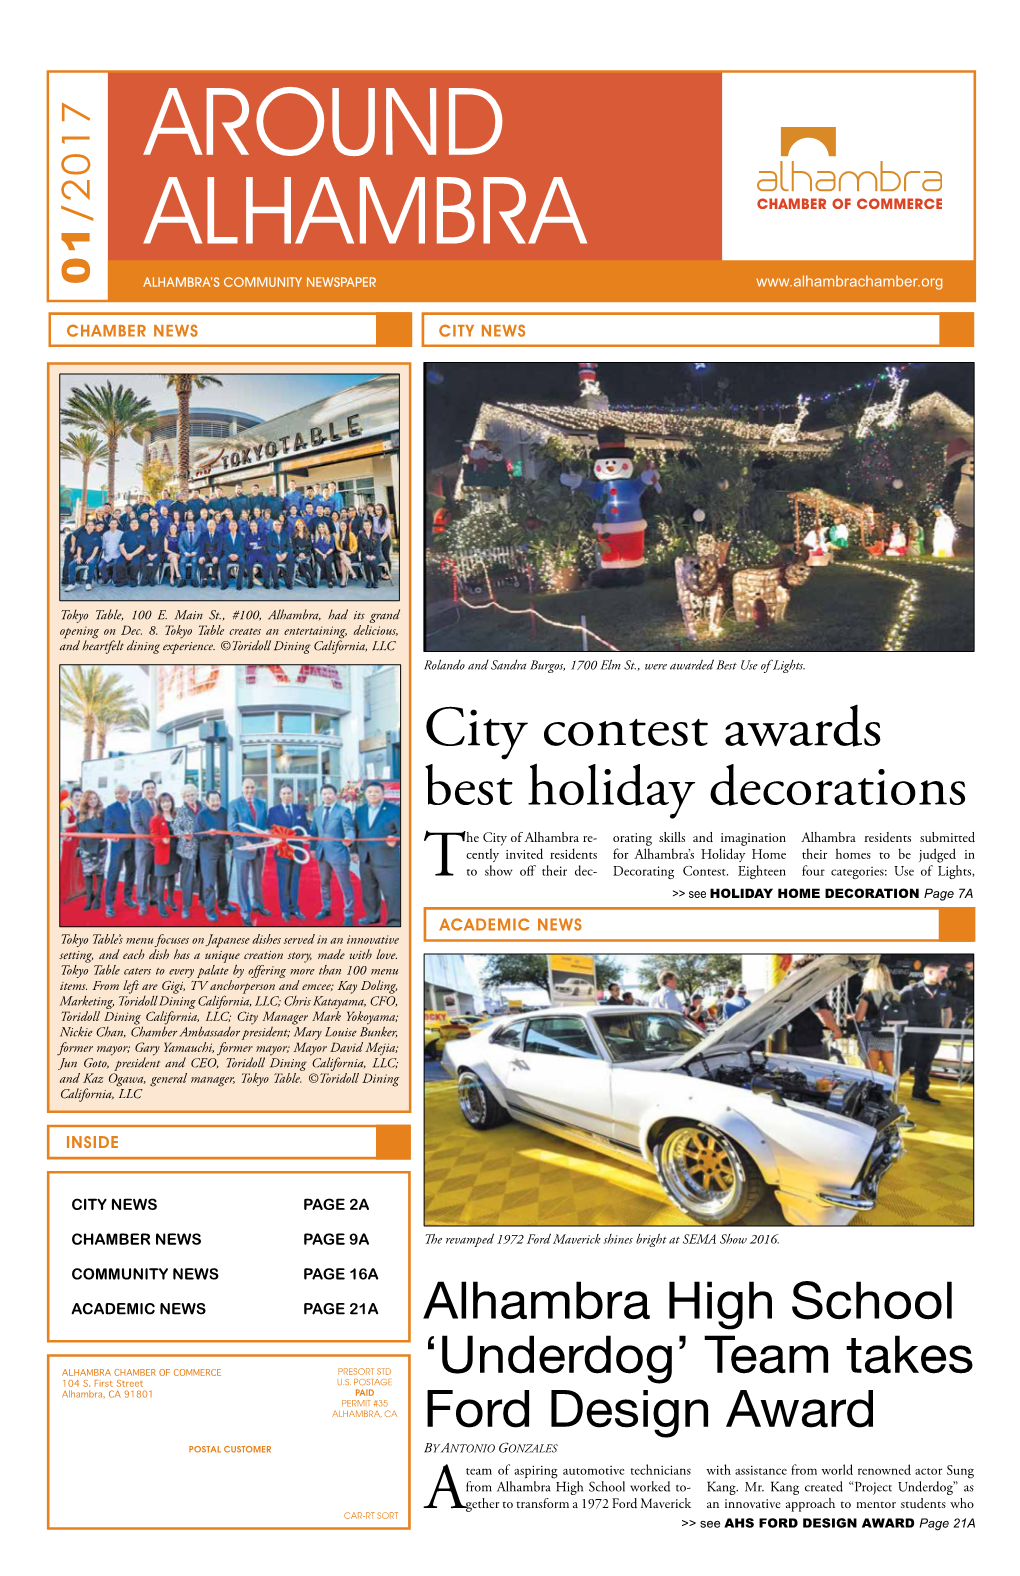 City Contest Awards Best Holiday Decorations